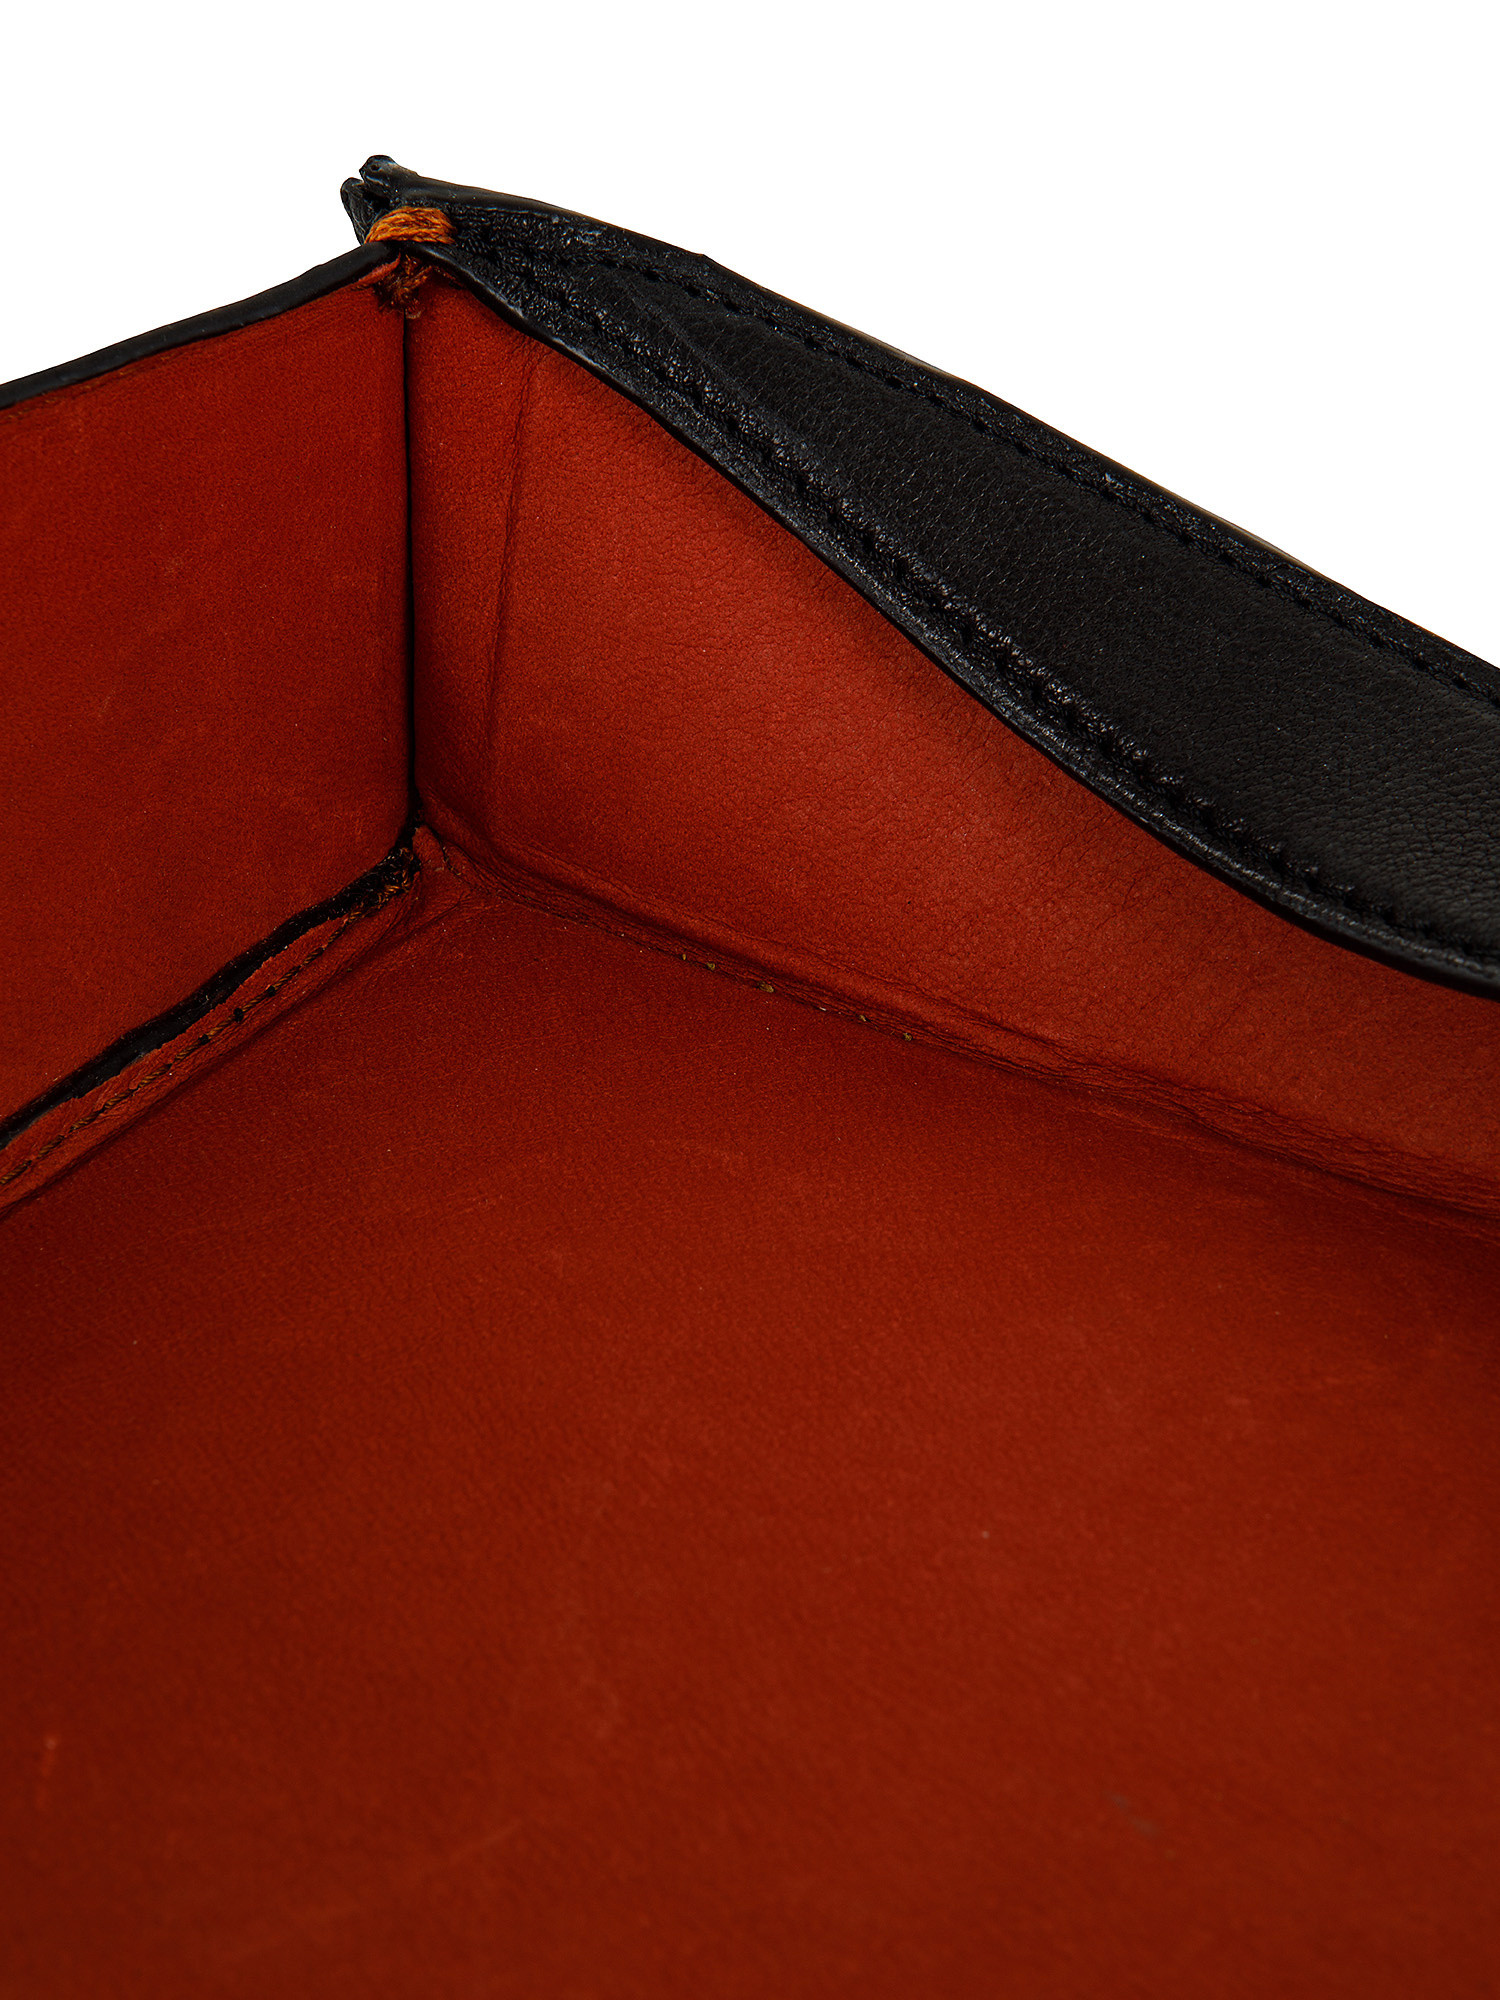  Buffalo leather valet tray by La.b, Multicolor, large image number 1